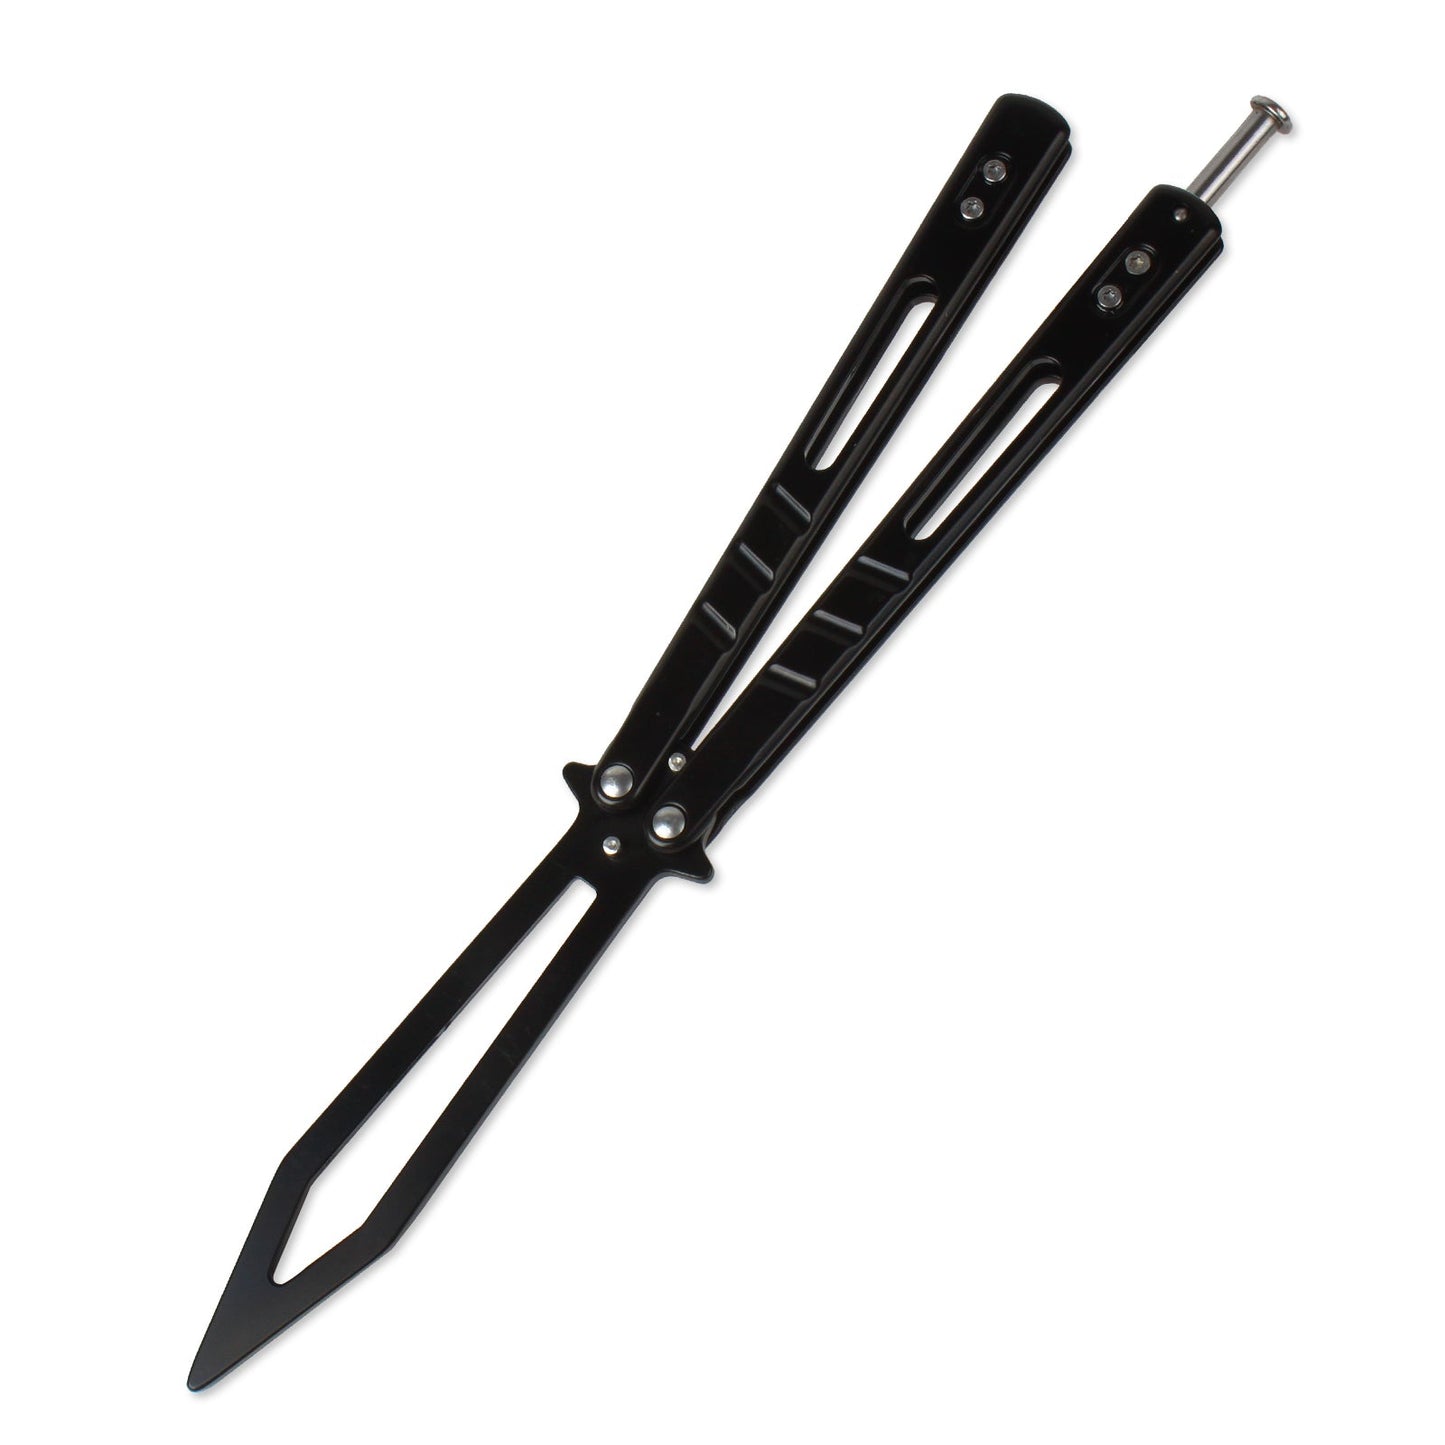 Andux Balisong Butterfly Knife Stainless Steel Outdoor Knives (Black) HDD41